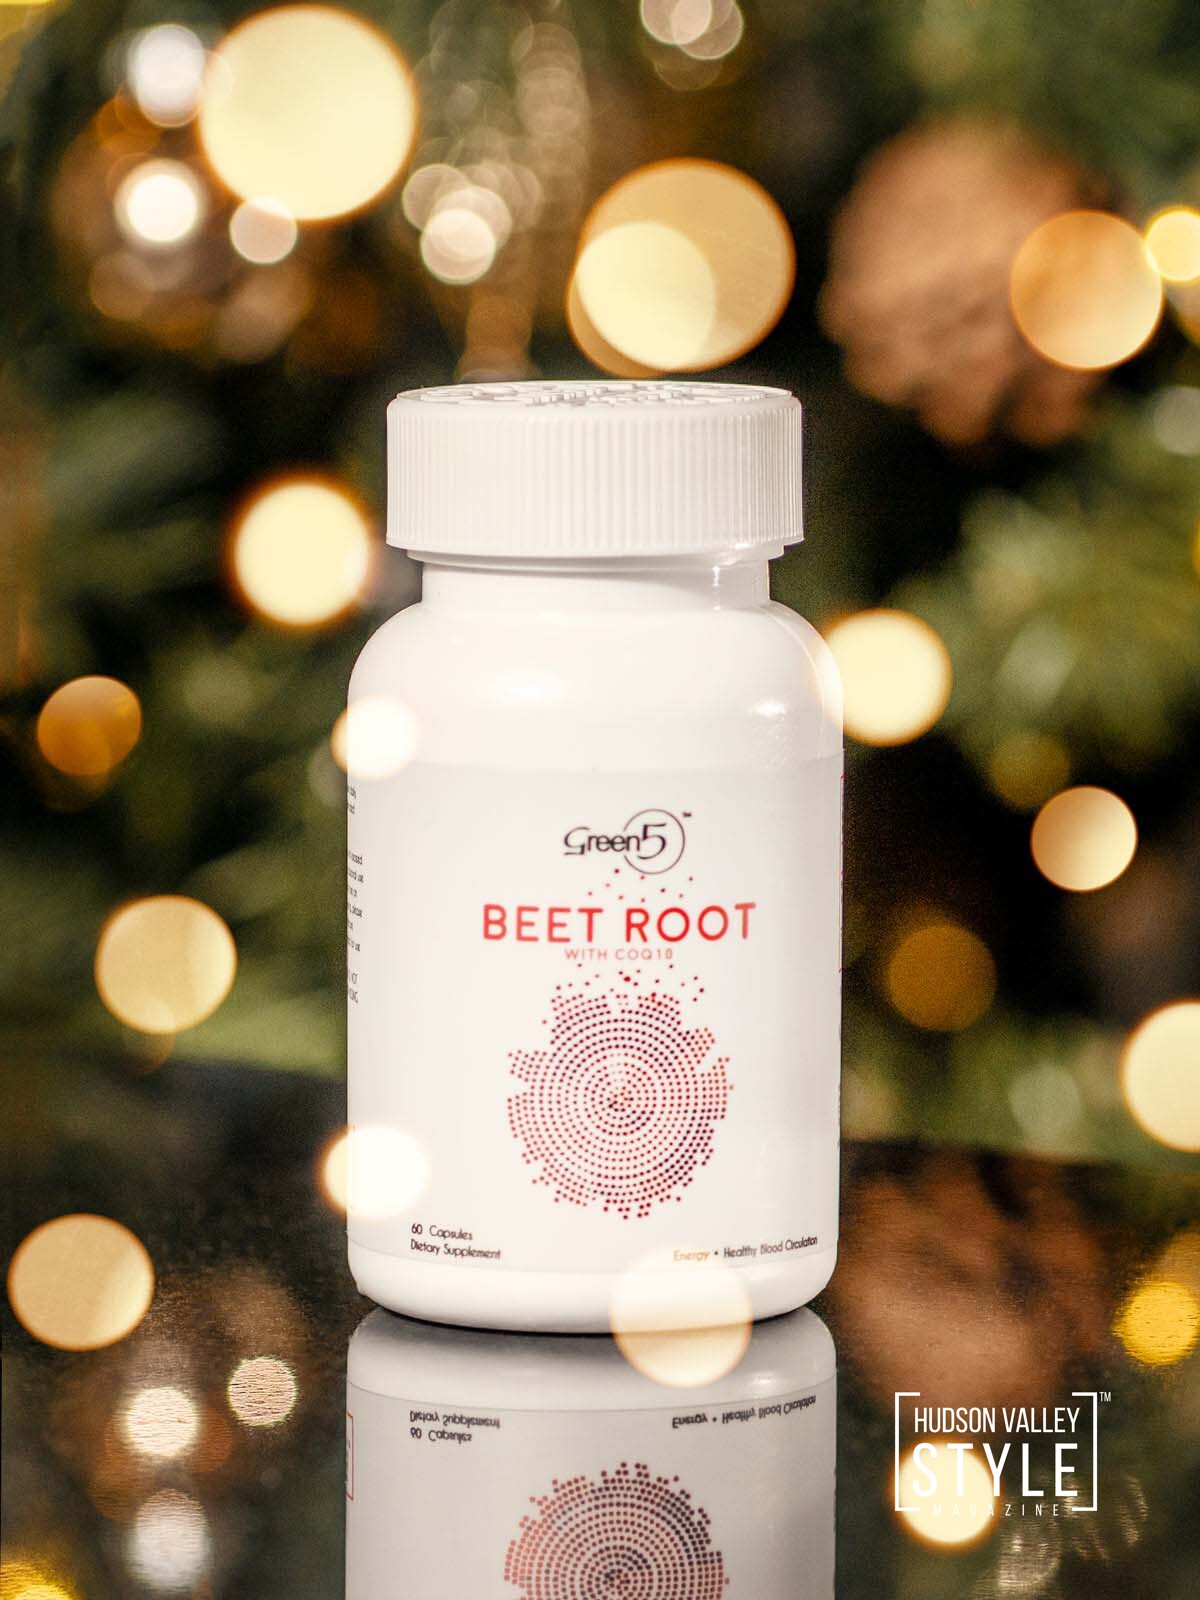 Easy Natural Detox Tips Presented by Beetroot + CoQ10 from GREEN5 Supplements – Holiday Gift Guide